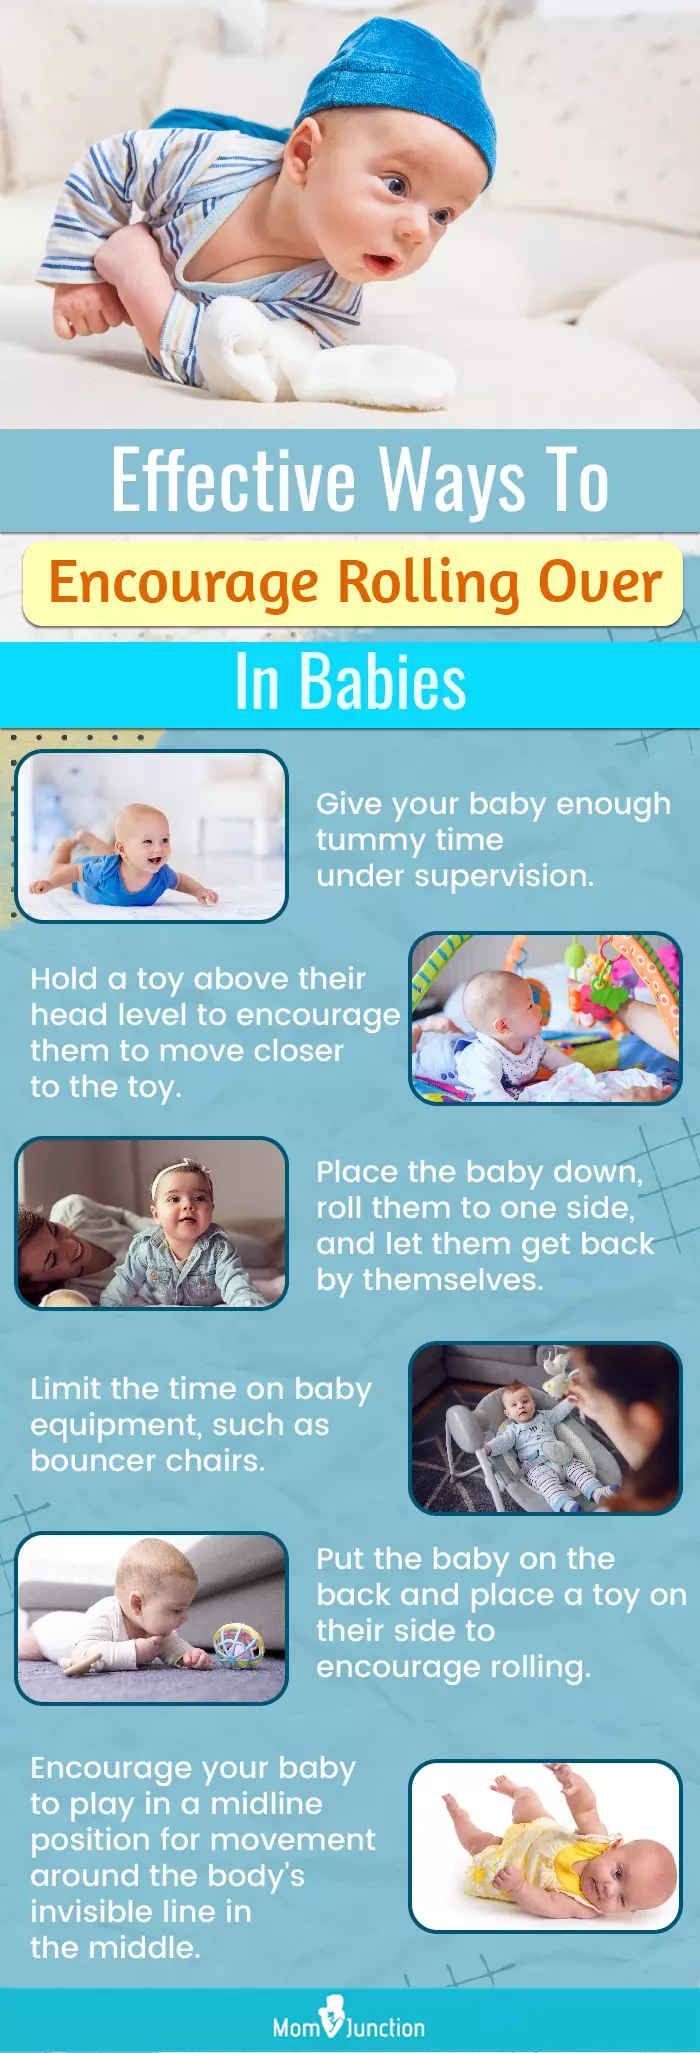 effective ways to encourage rolling over in babies (infographic)